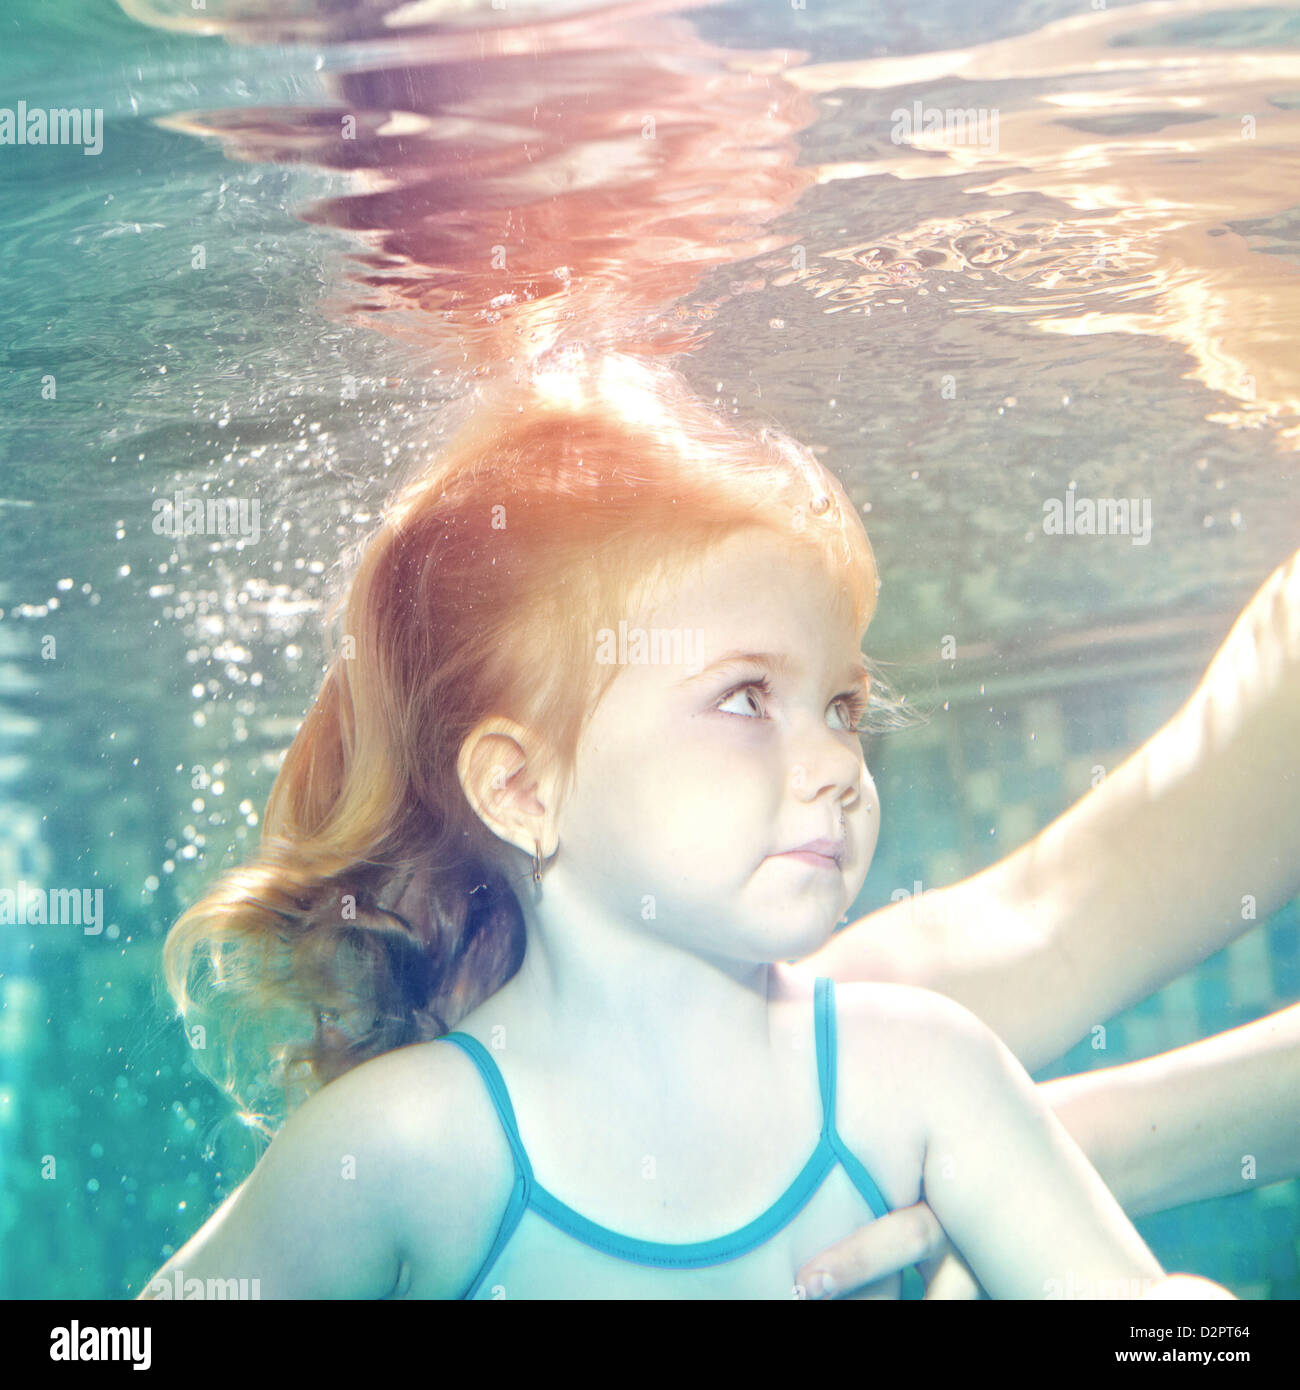 Caucasian girl swimming under water Banque D'Images